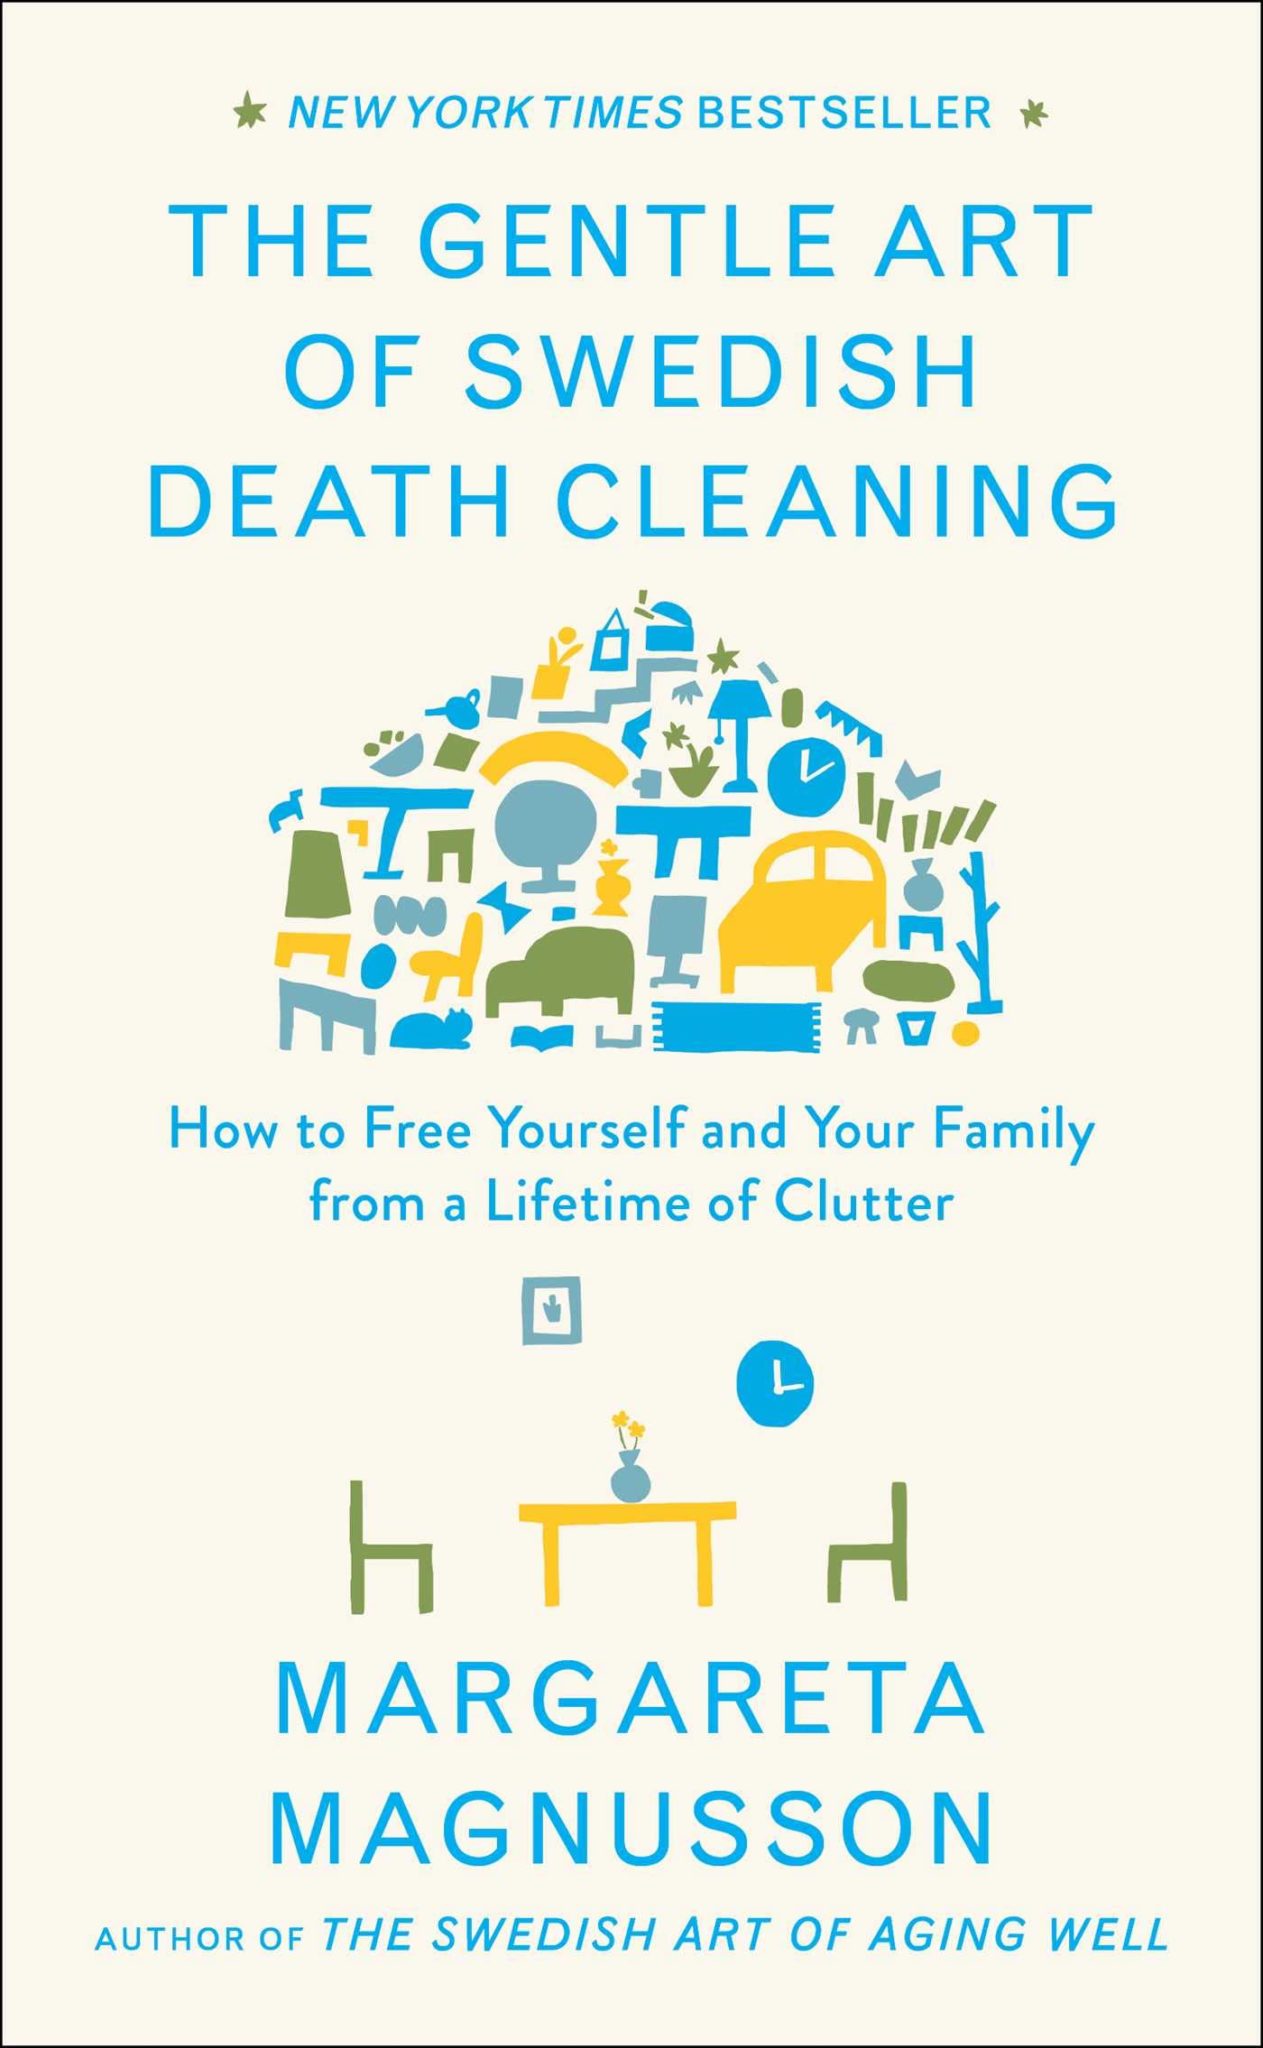 The Gentle Art of Swedish Death Cleaning book cover